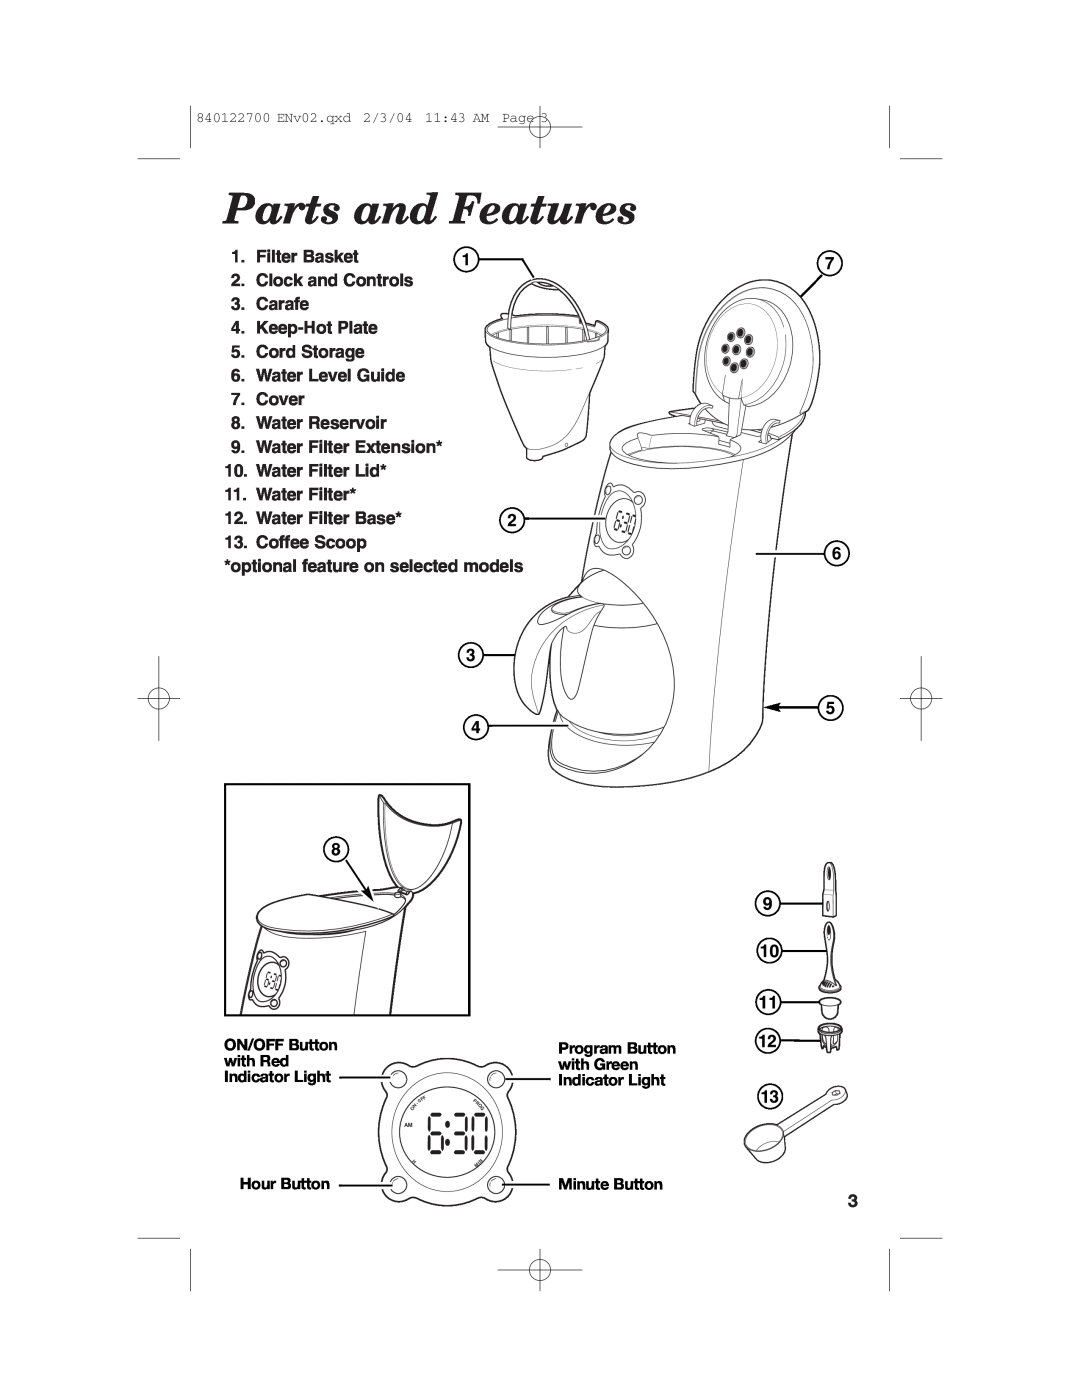 Hamilton Beach Coffemaker manual Parts and Features 